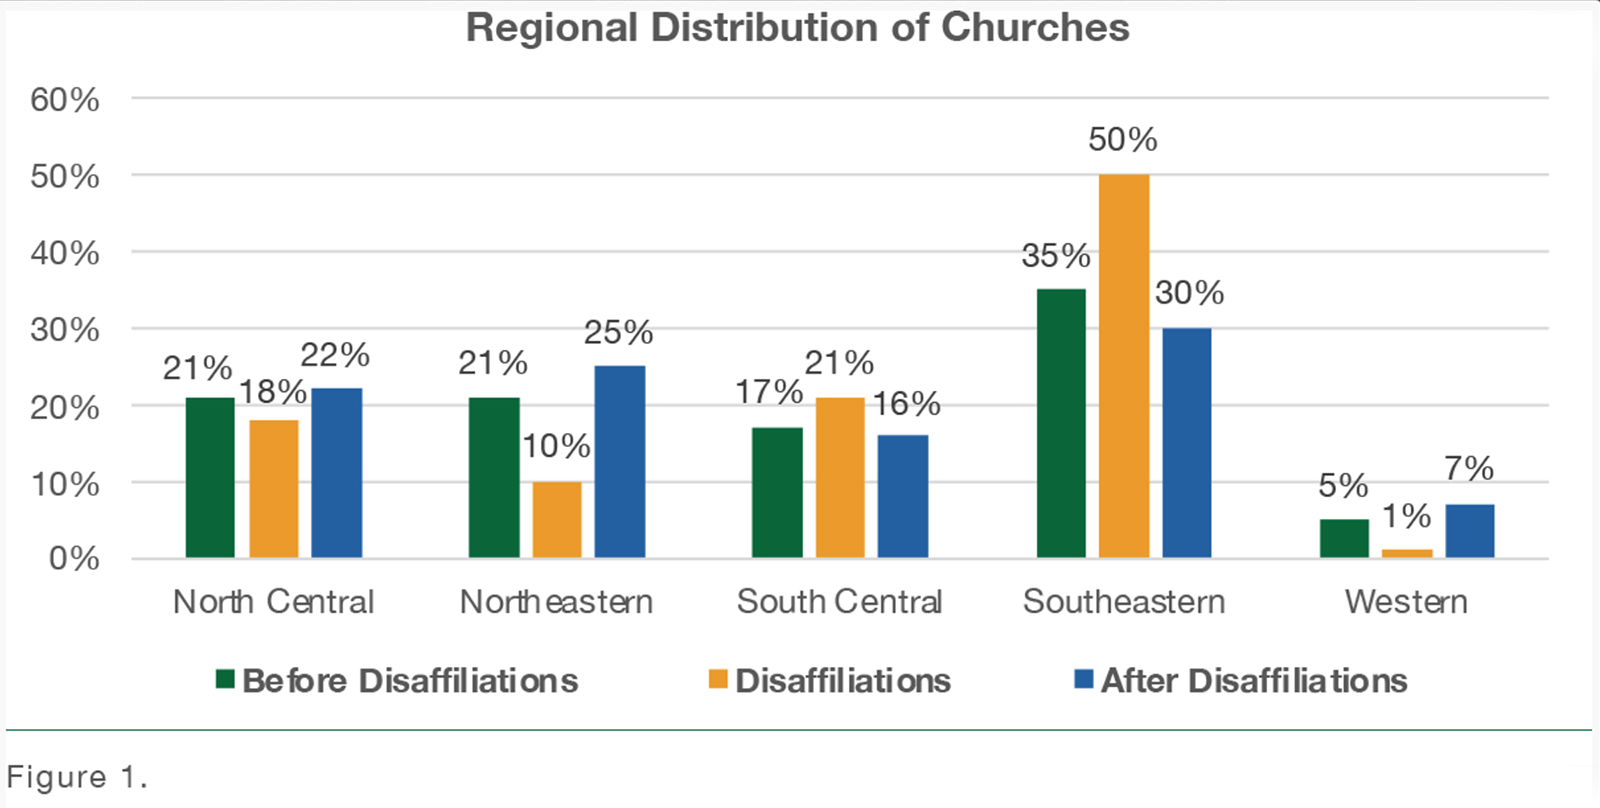 "Regional Distribution of Churches" (Graphic courtesy Lewis Center for Church Leadership)